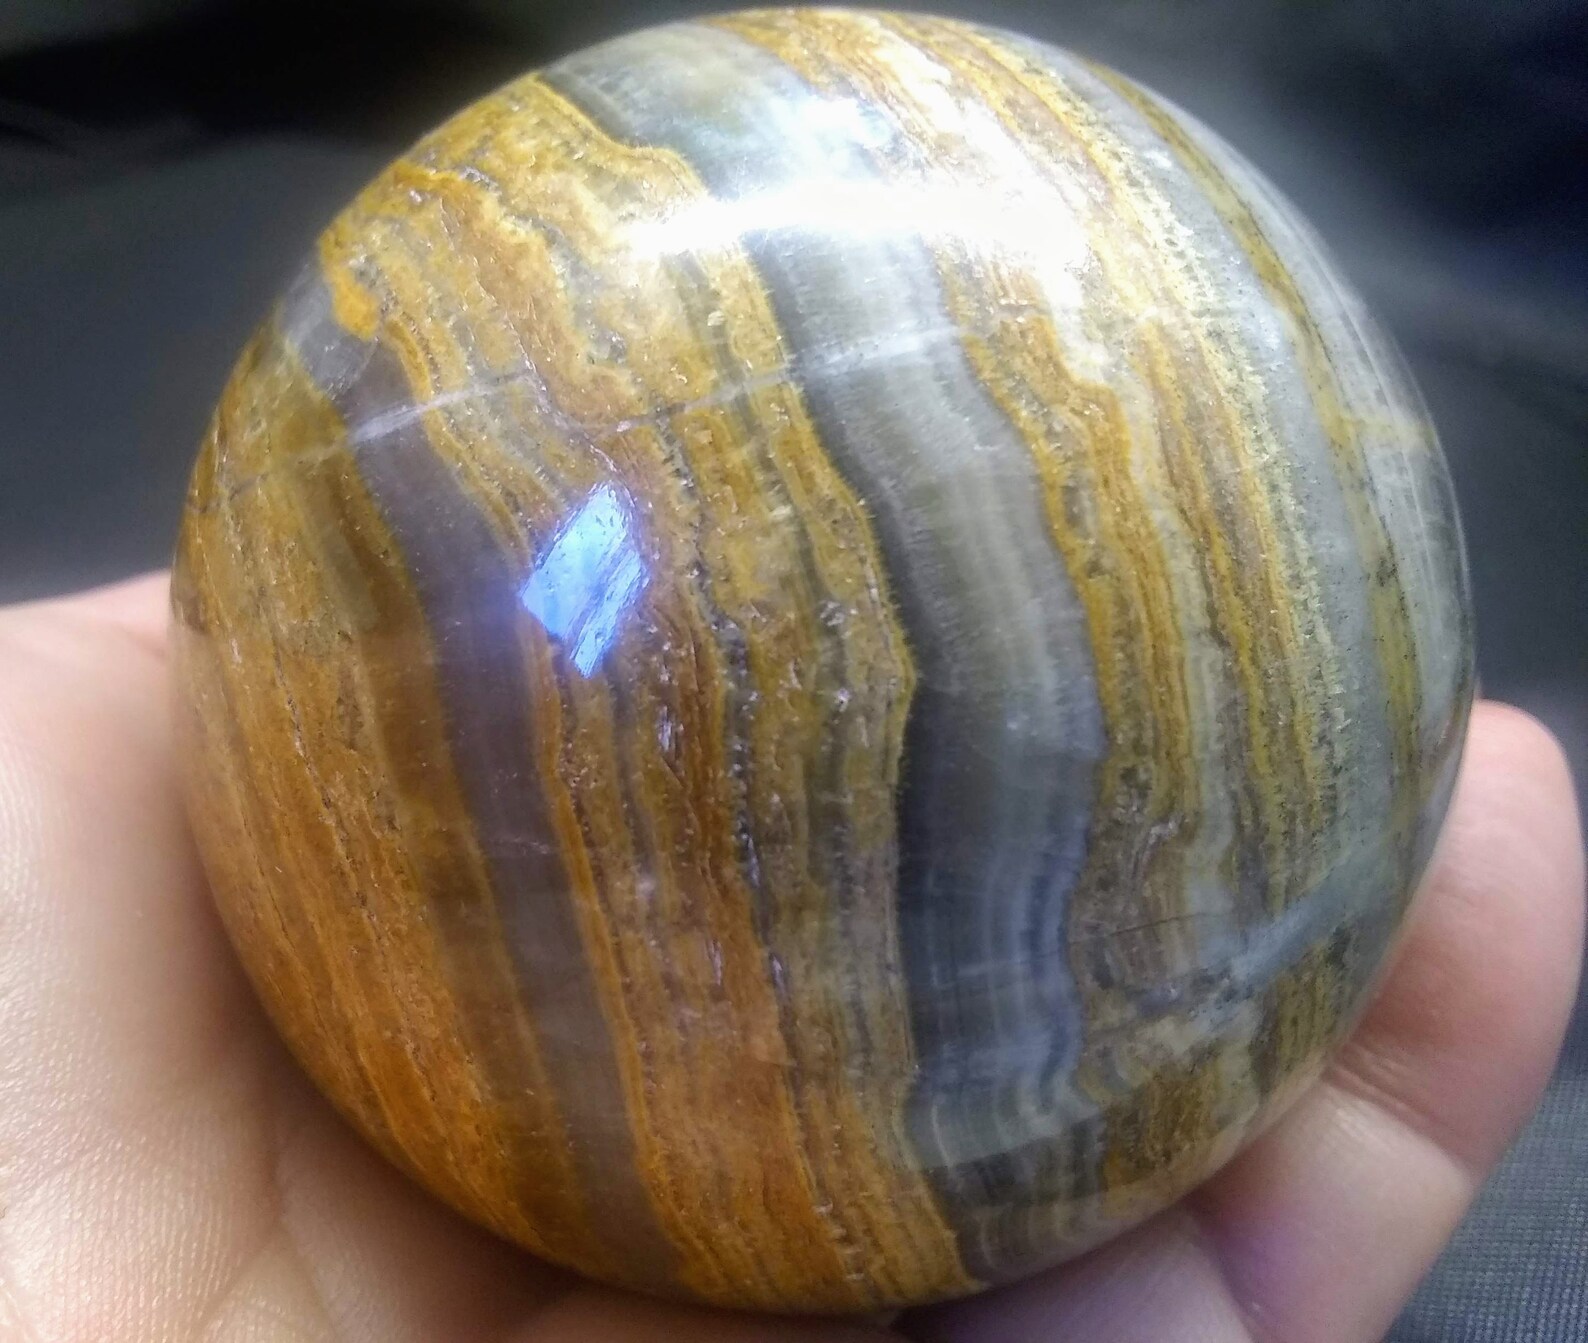 65mm Multicolor Banded Calcite Onyx Sphere Polished Crystal | Etsy